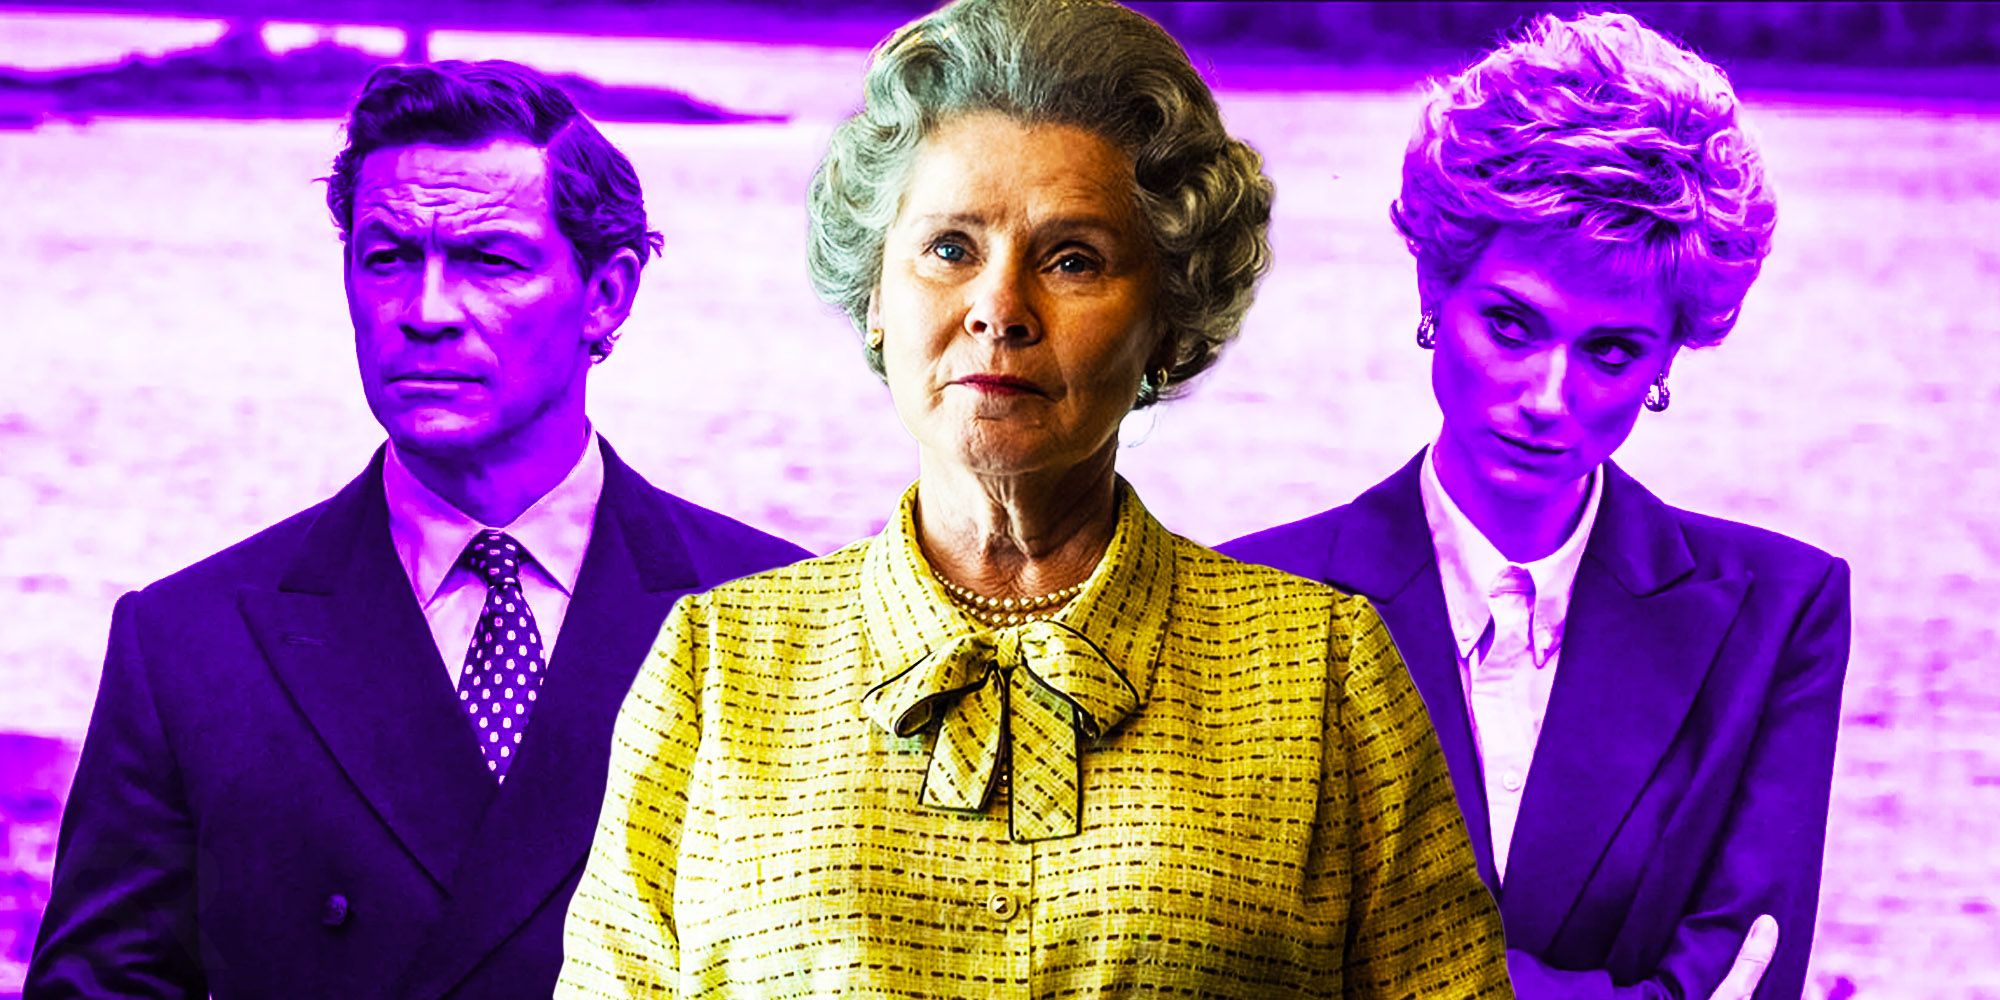 Blended image of Prince Charles, Queen Elizabeth, and Princess Diana in The Crown.